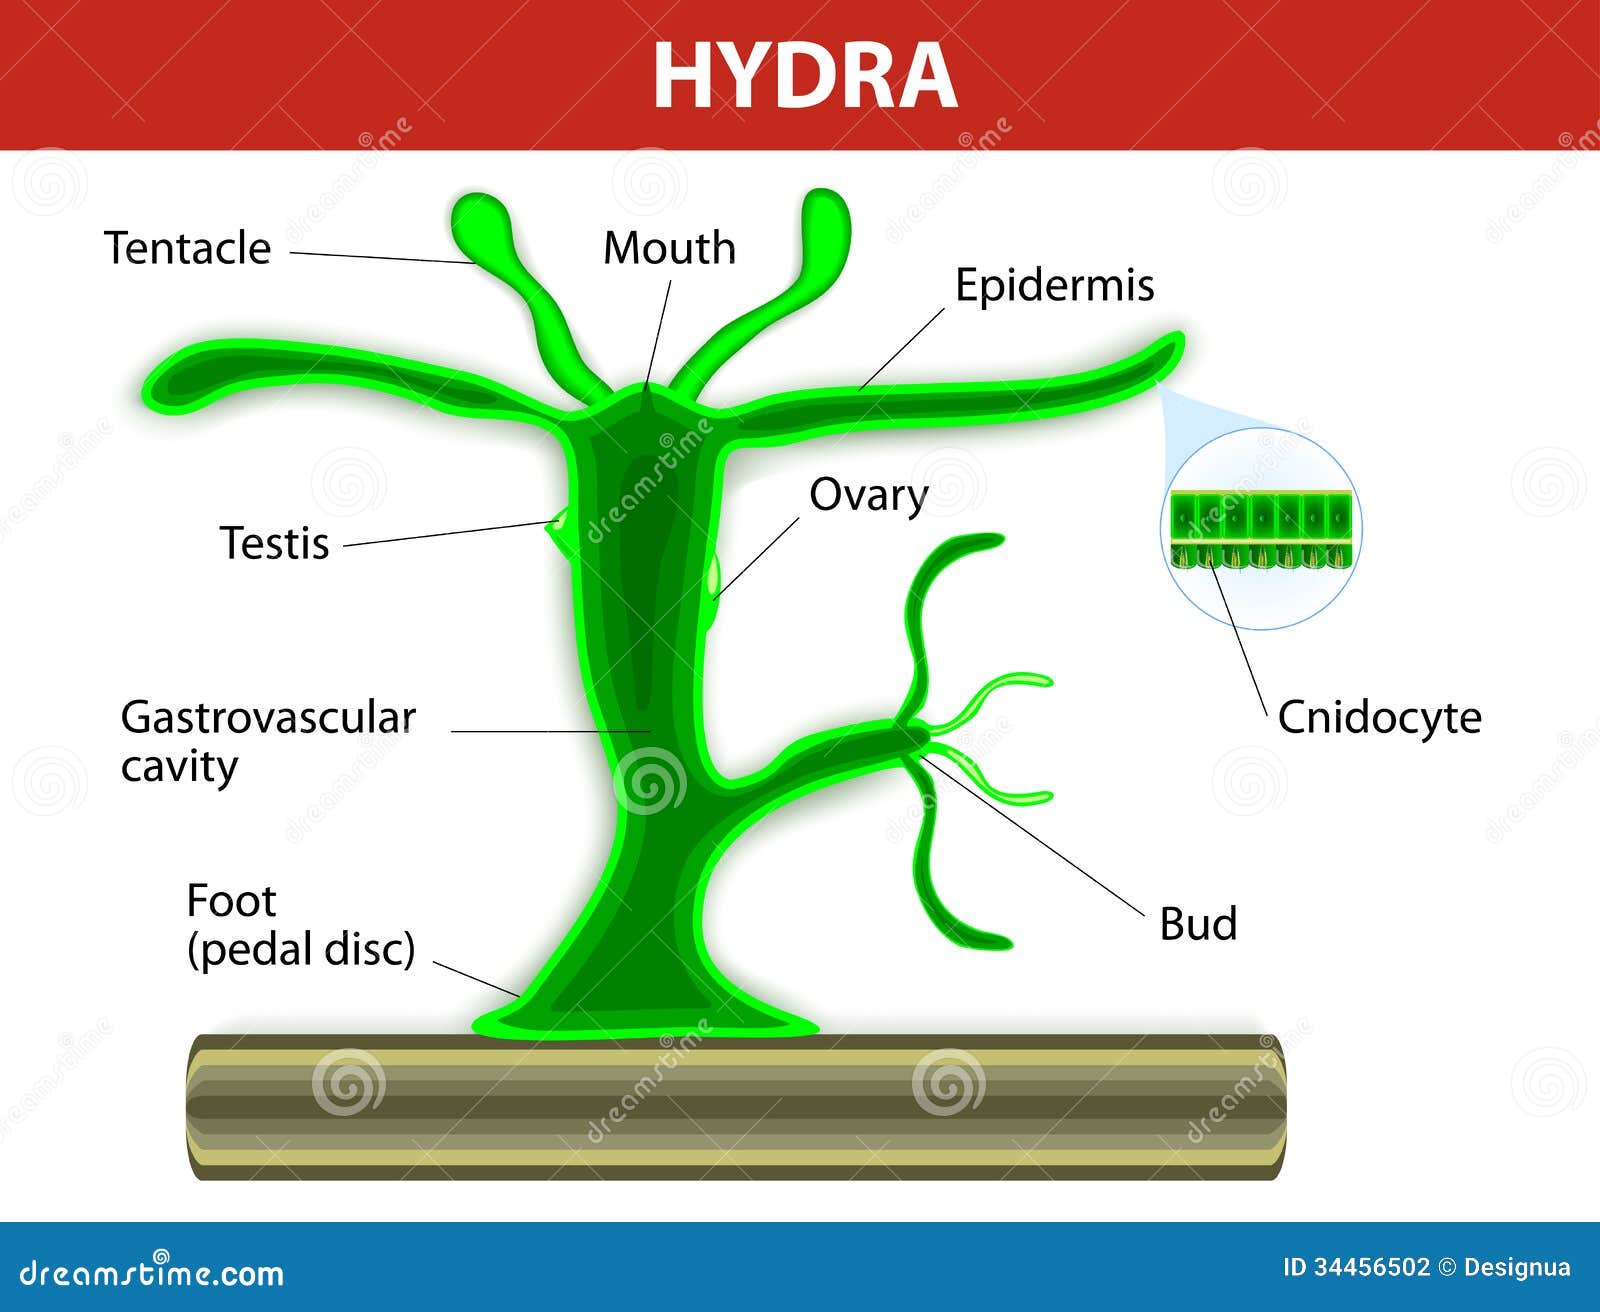 hydra labeled diagram